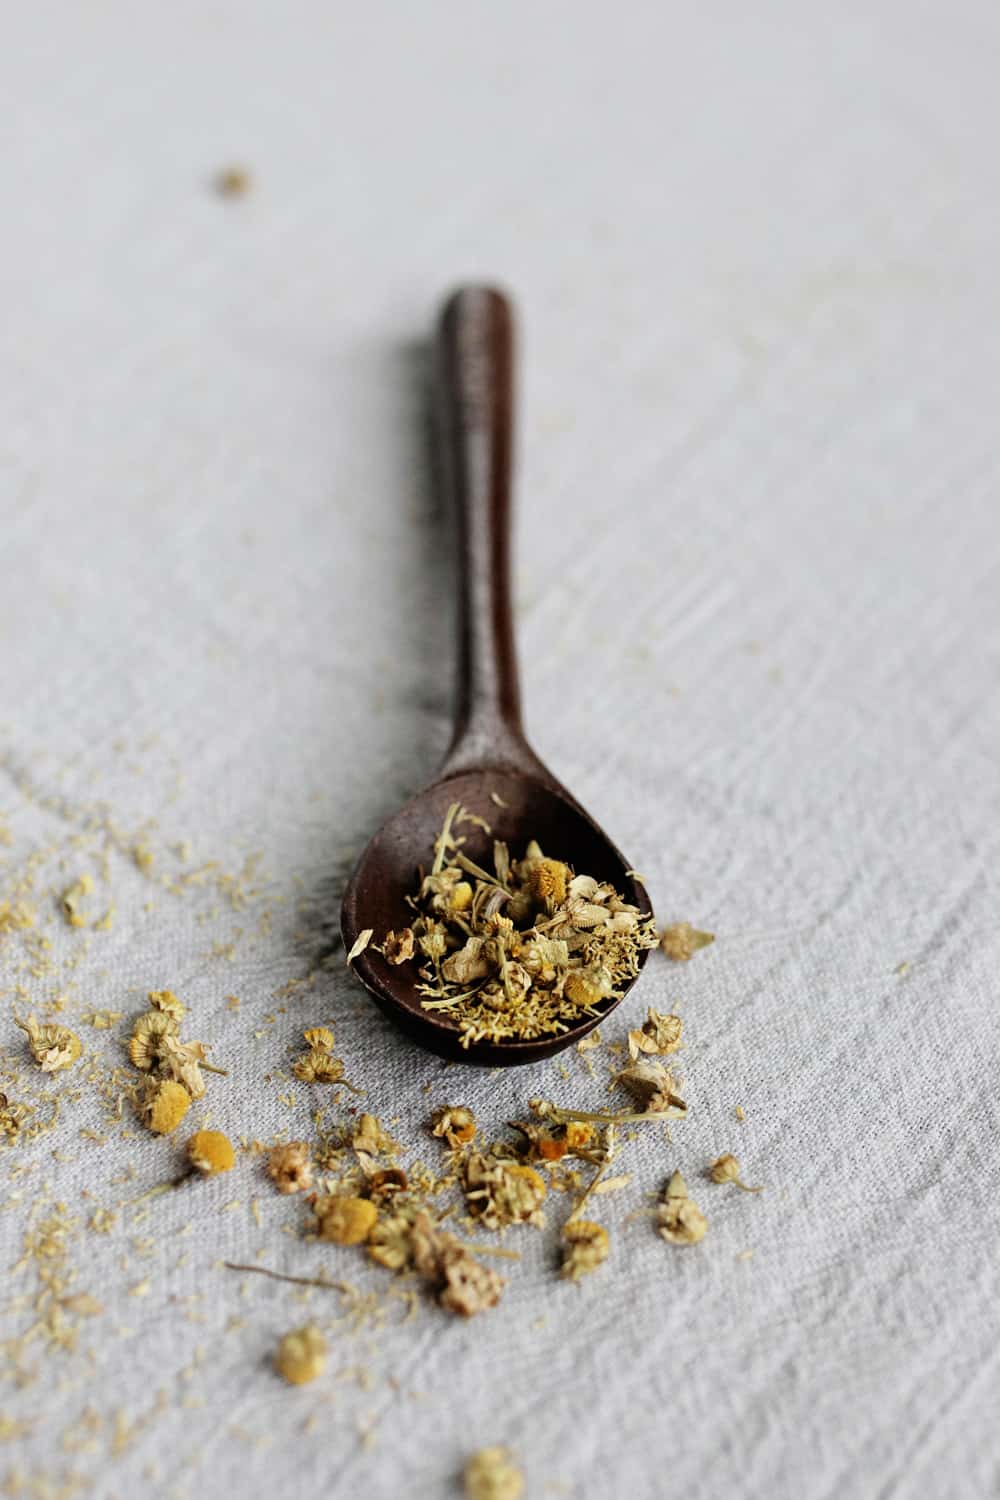 9 Ways to Use Chamomile in Natural Remedies